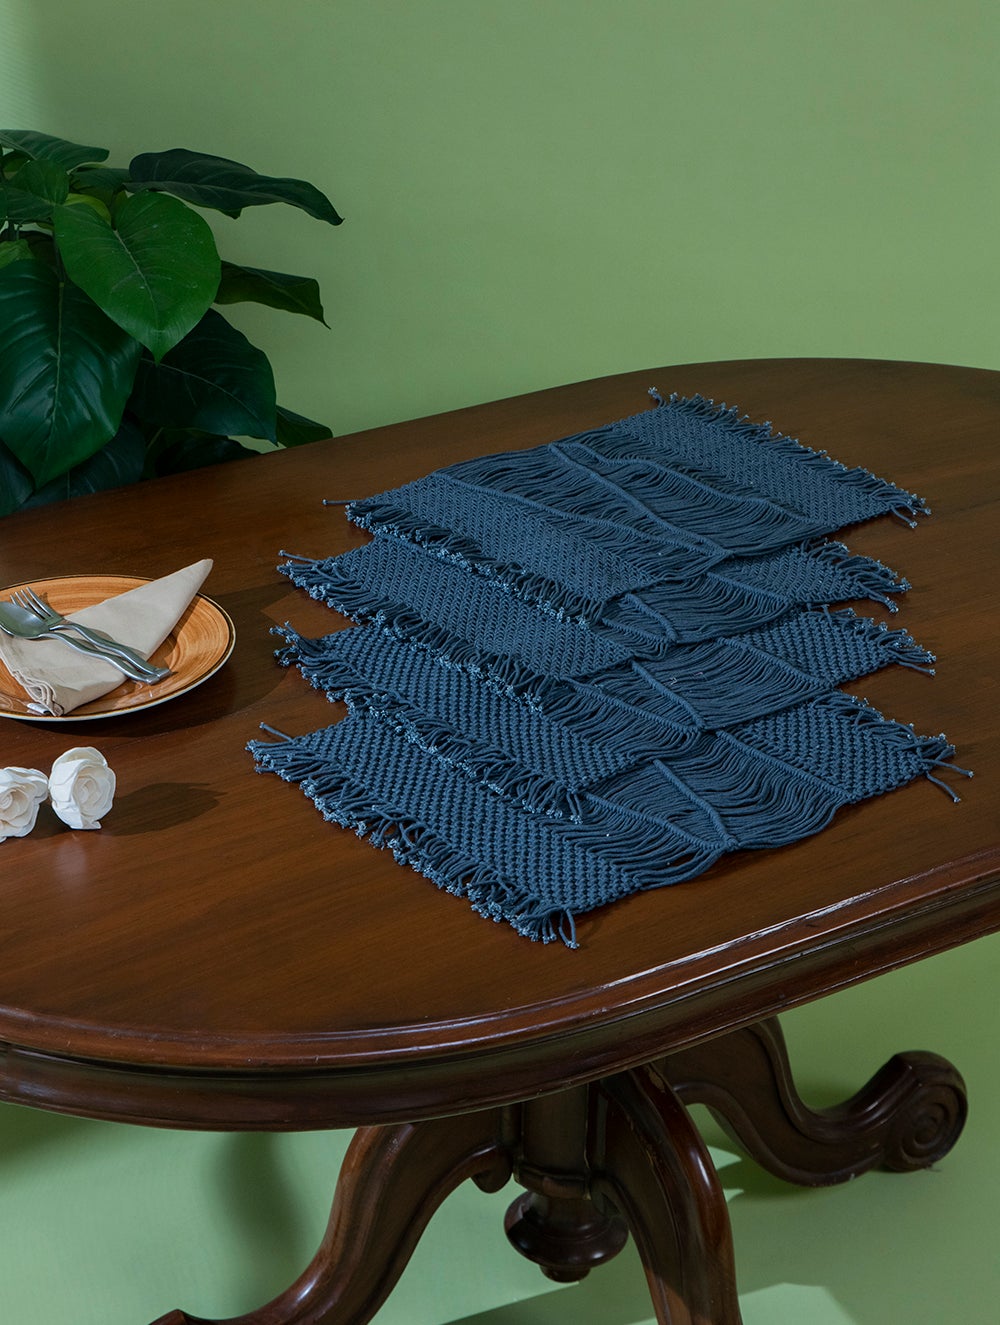 Load image into Gallery viewer, Handknotted Macramé Table Mats - Meander, Grey (Set of 4)